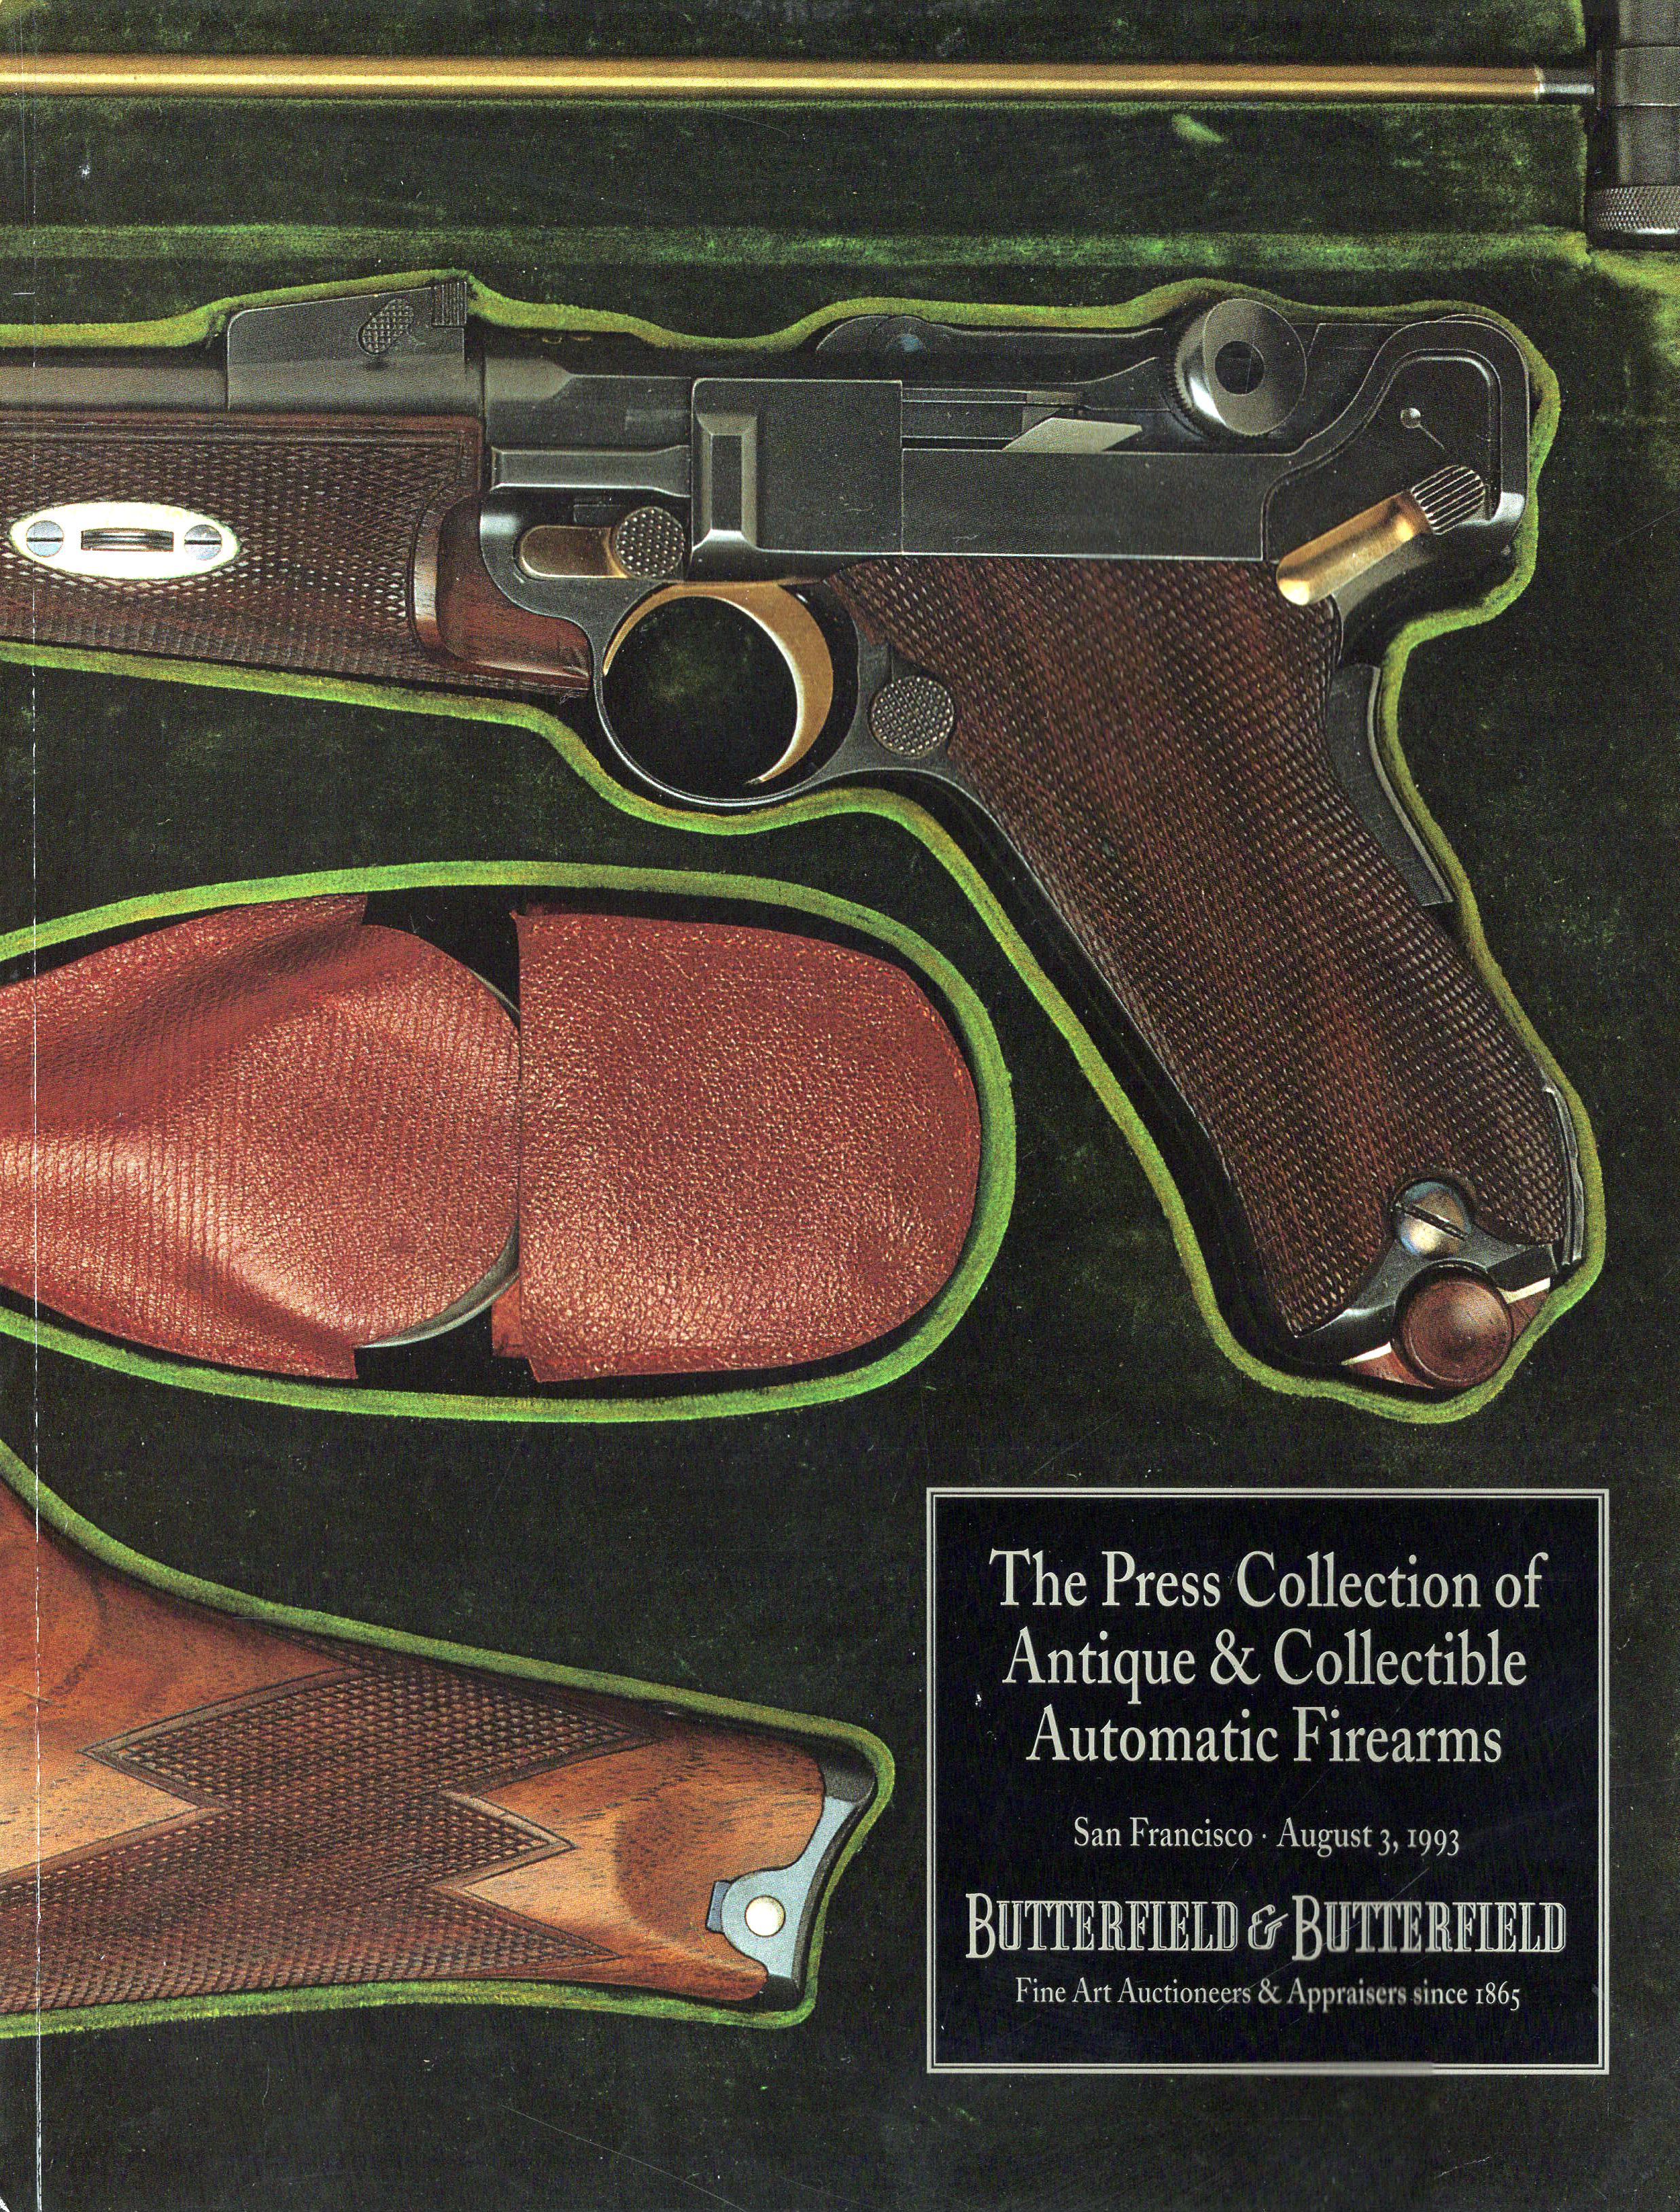 Butterfield & Butterfield August 1993 Antique & Collectible Automatic Firearms